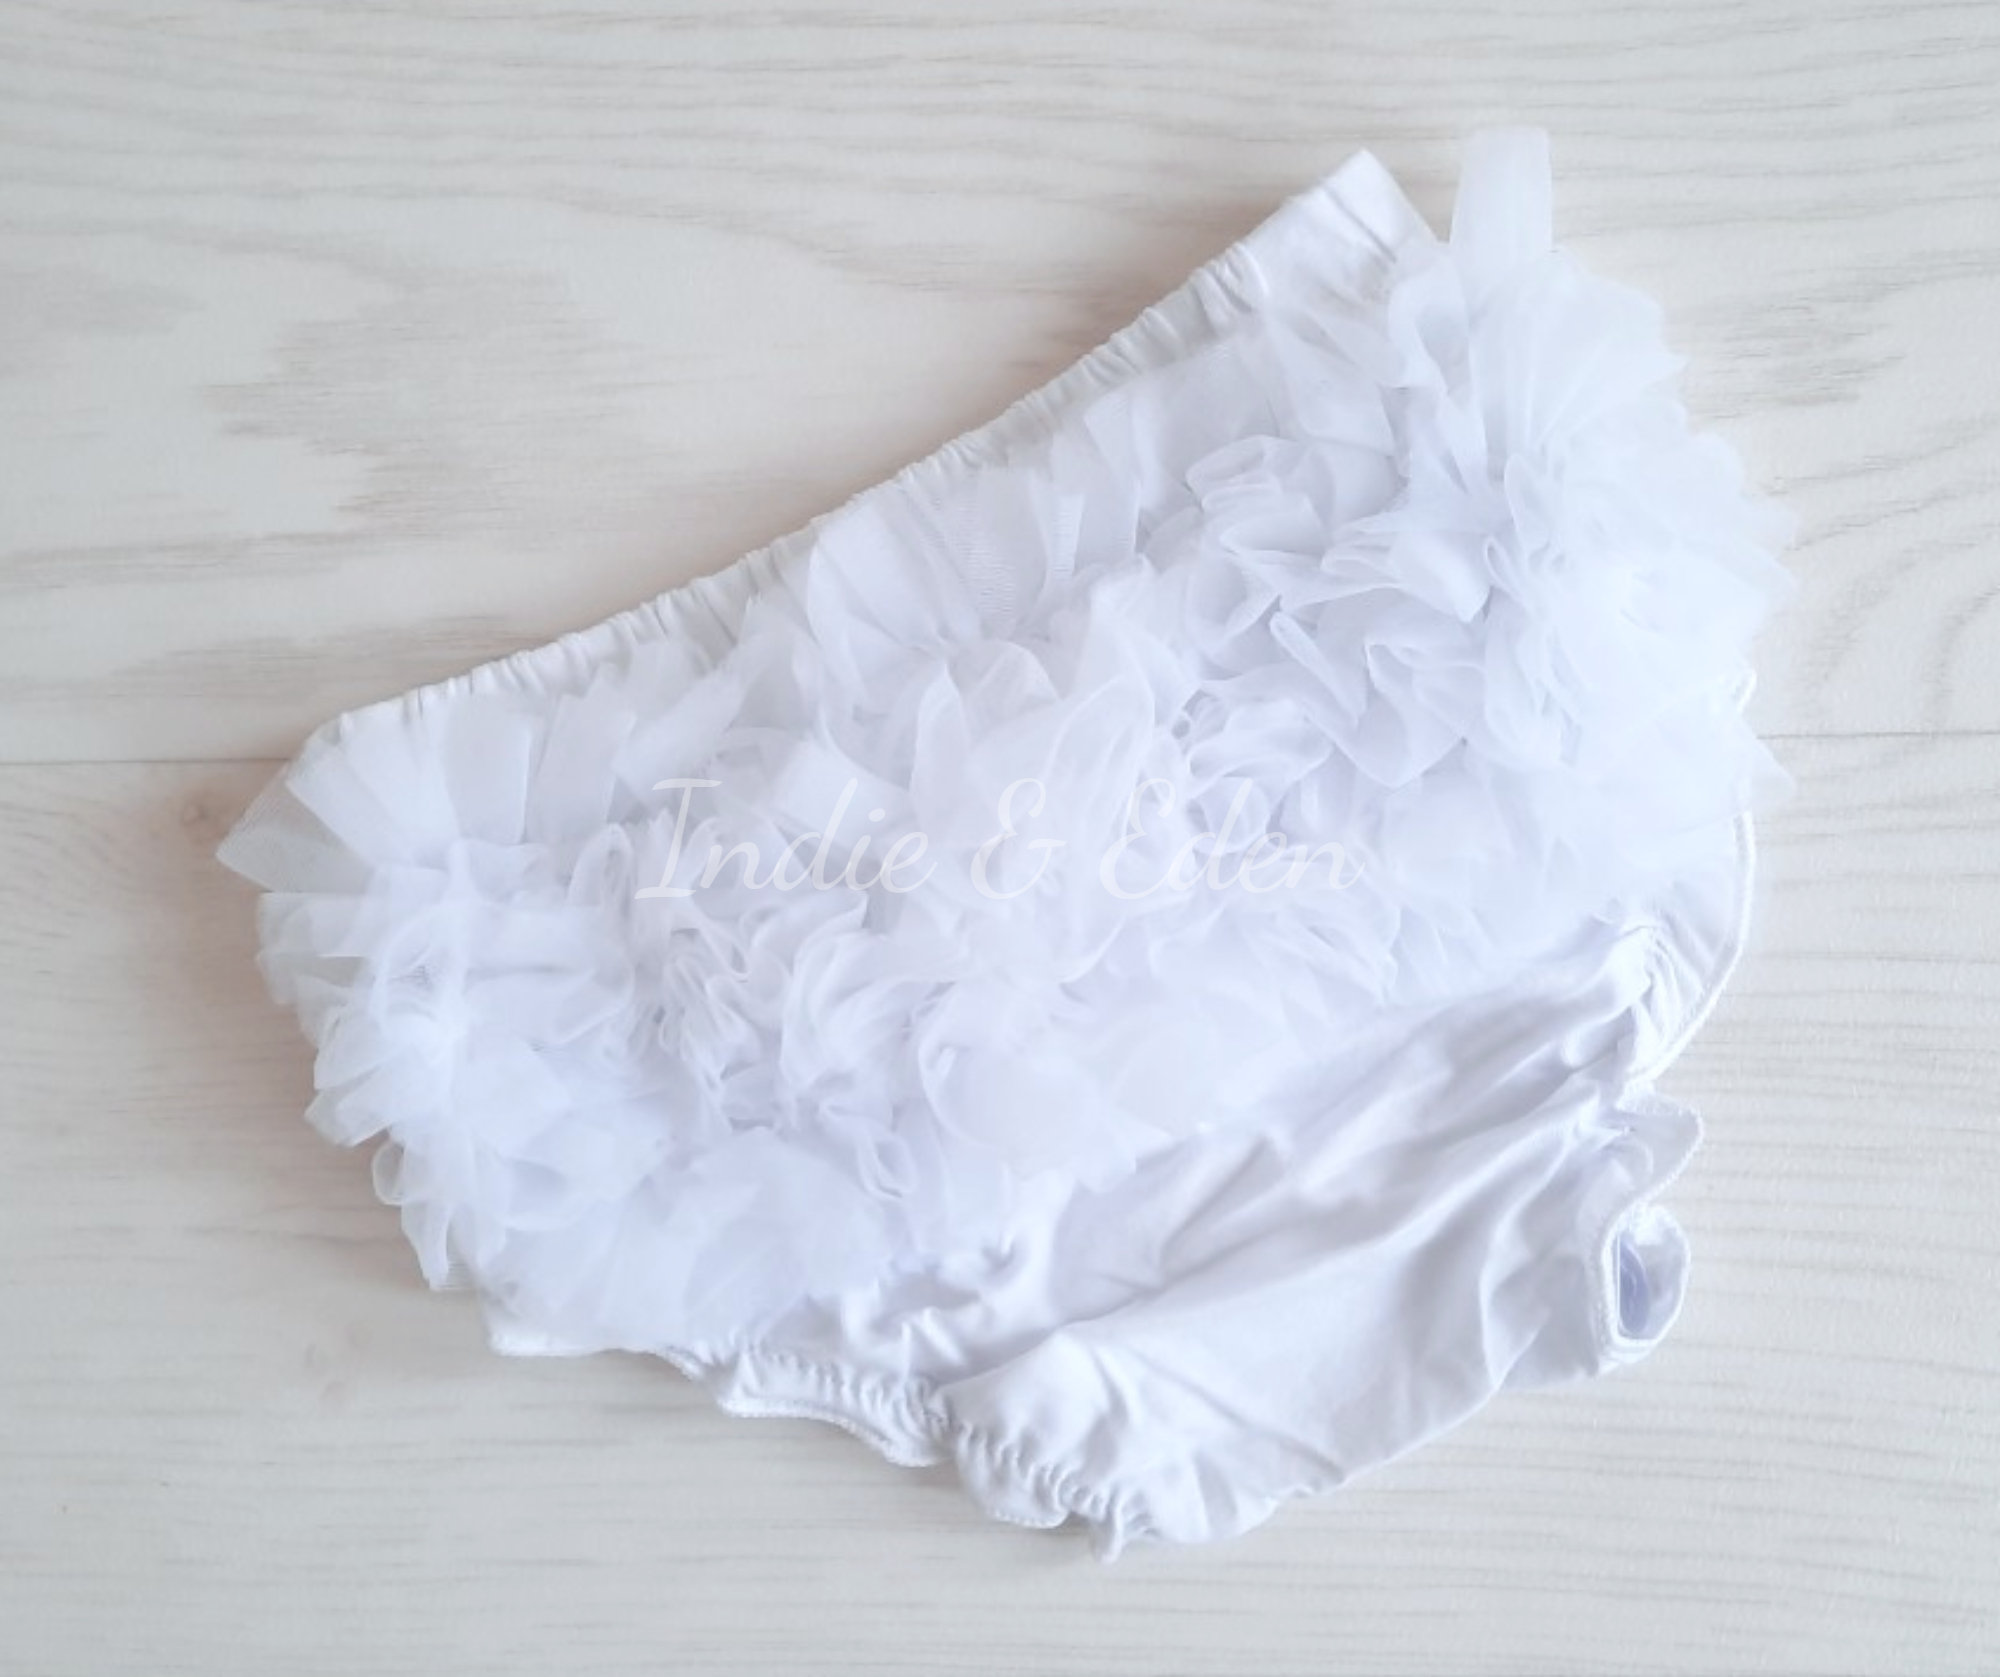 Babies Frilly Nappy Cover Knickers Lace Satin Christening Pants Bloomers 